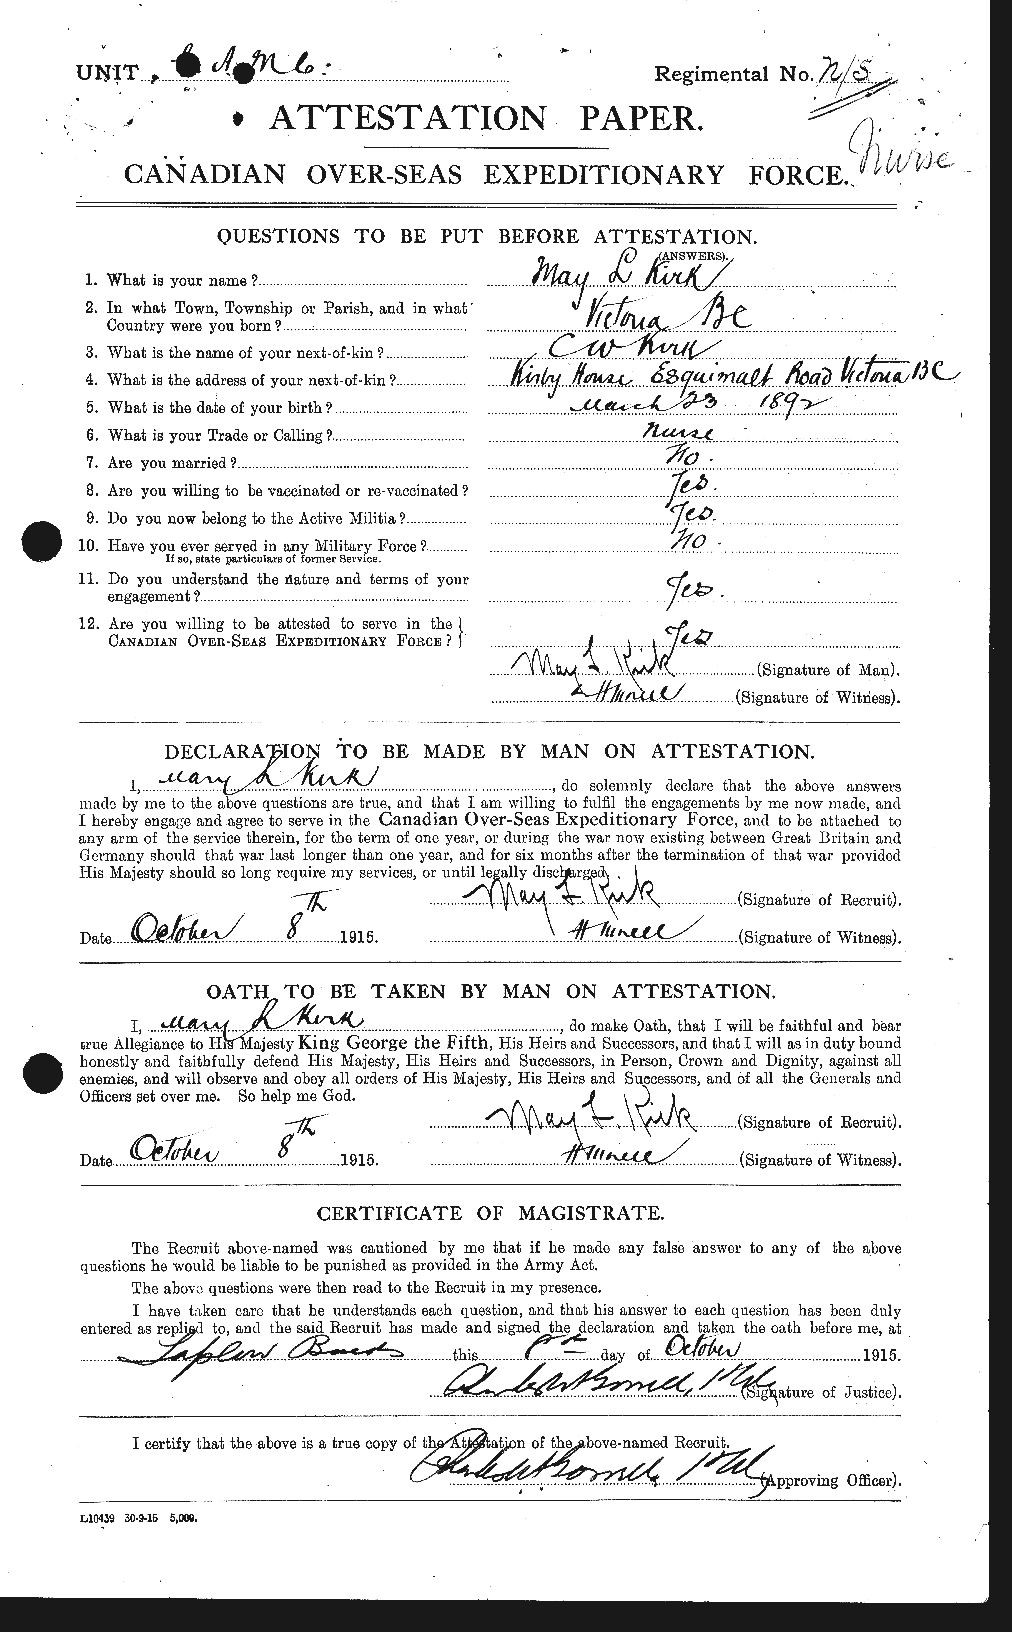 Personnel Records of the First World War - CEF 440878a